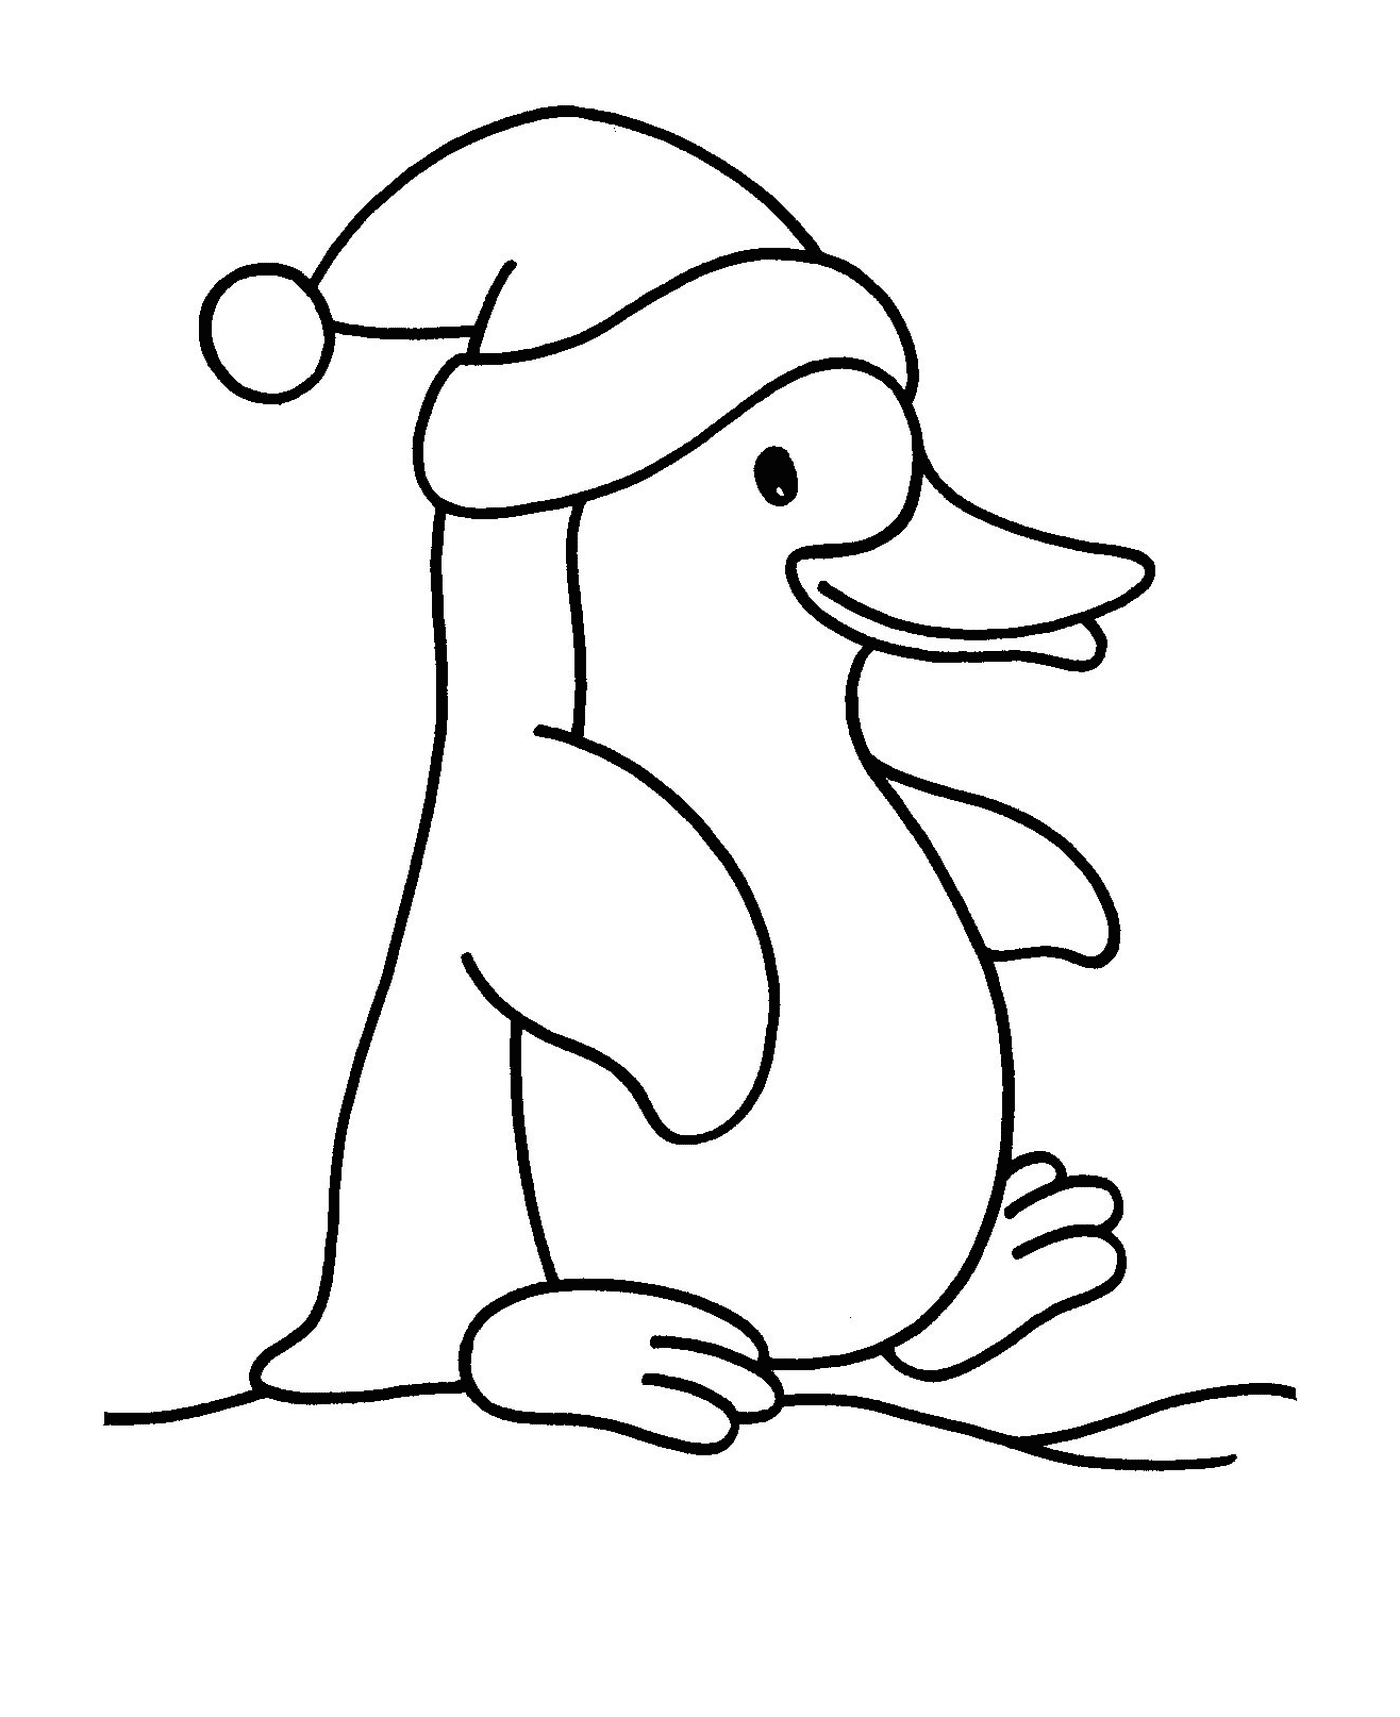  Charmant Weihnachtspinguin 